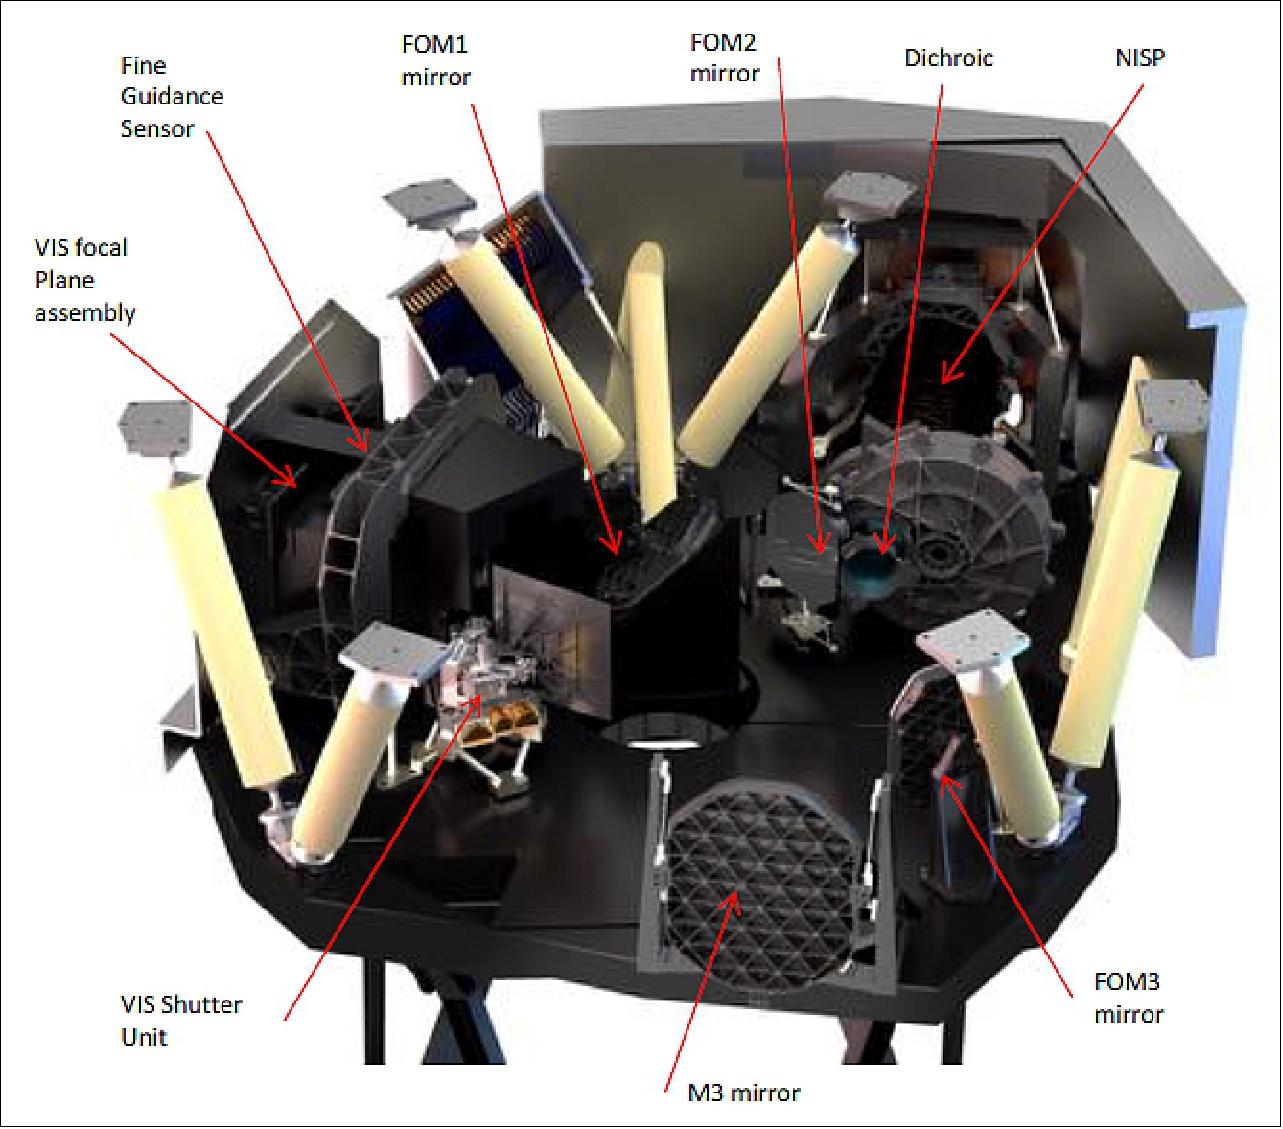 Figure 16: Rear view of the PLM showing the instrument cavity (image credit: Euclid Consortium)